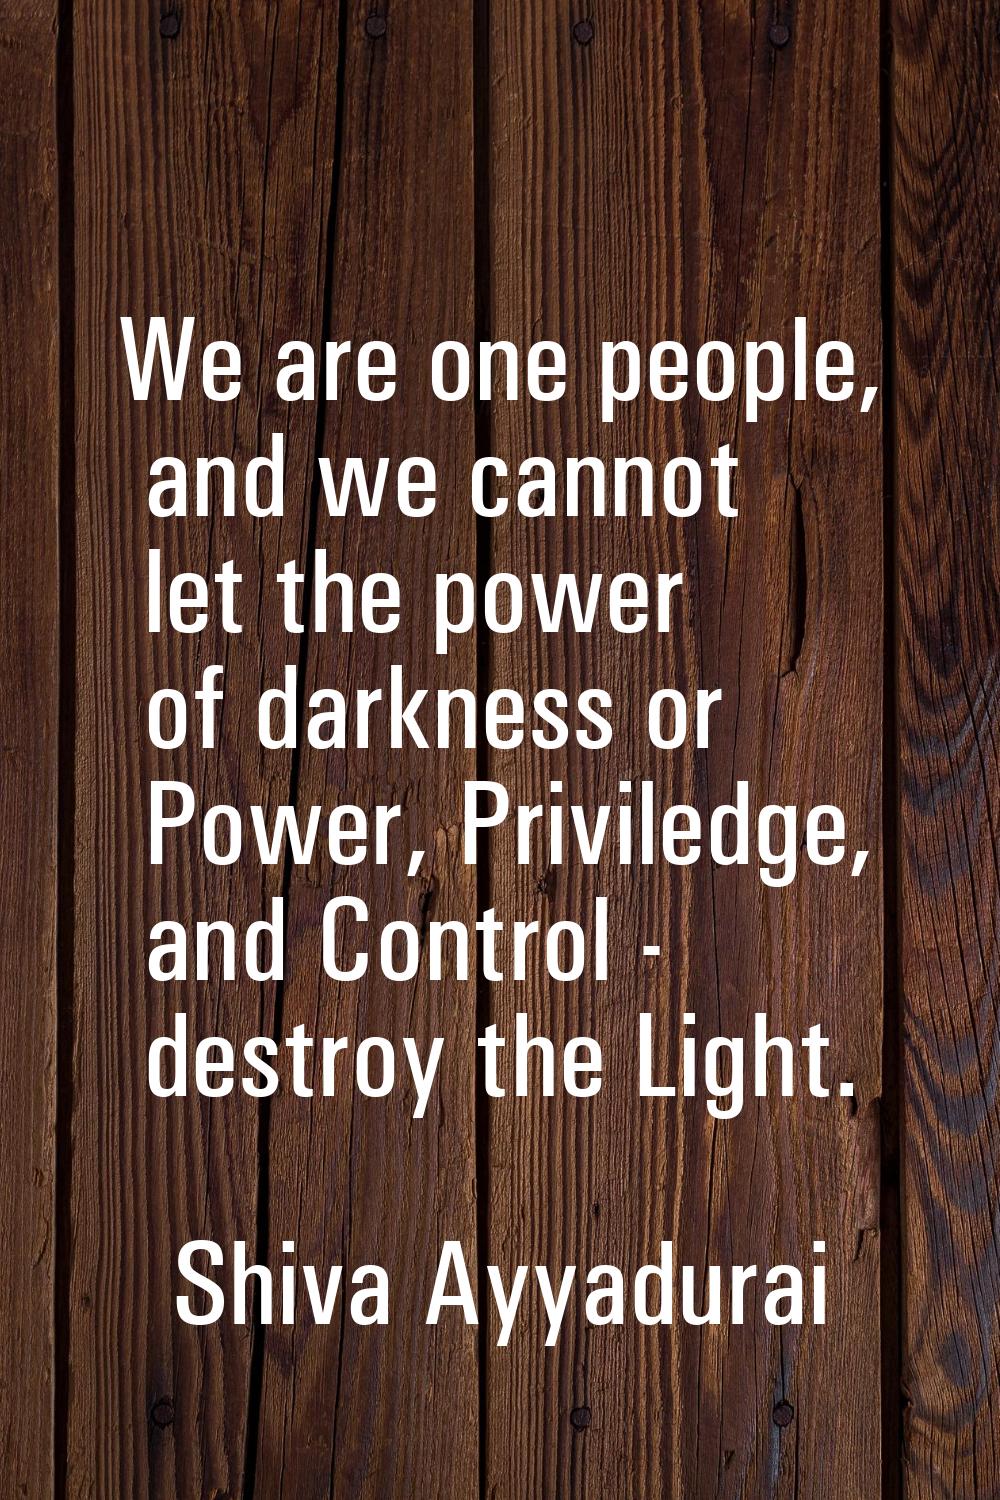 We are one people, and we cannot let the power of darkness or Power, Priviledge, and Control - dest